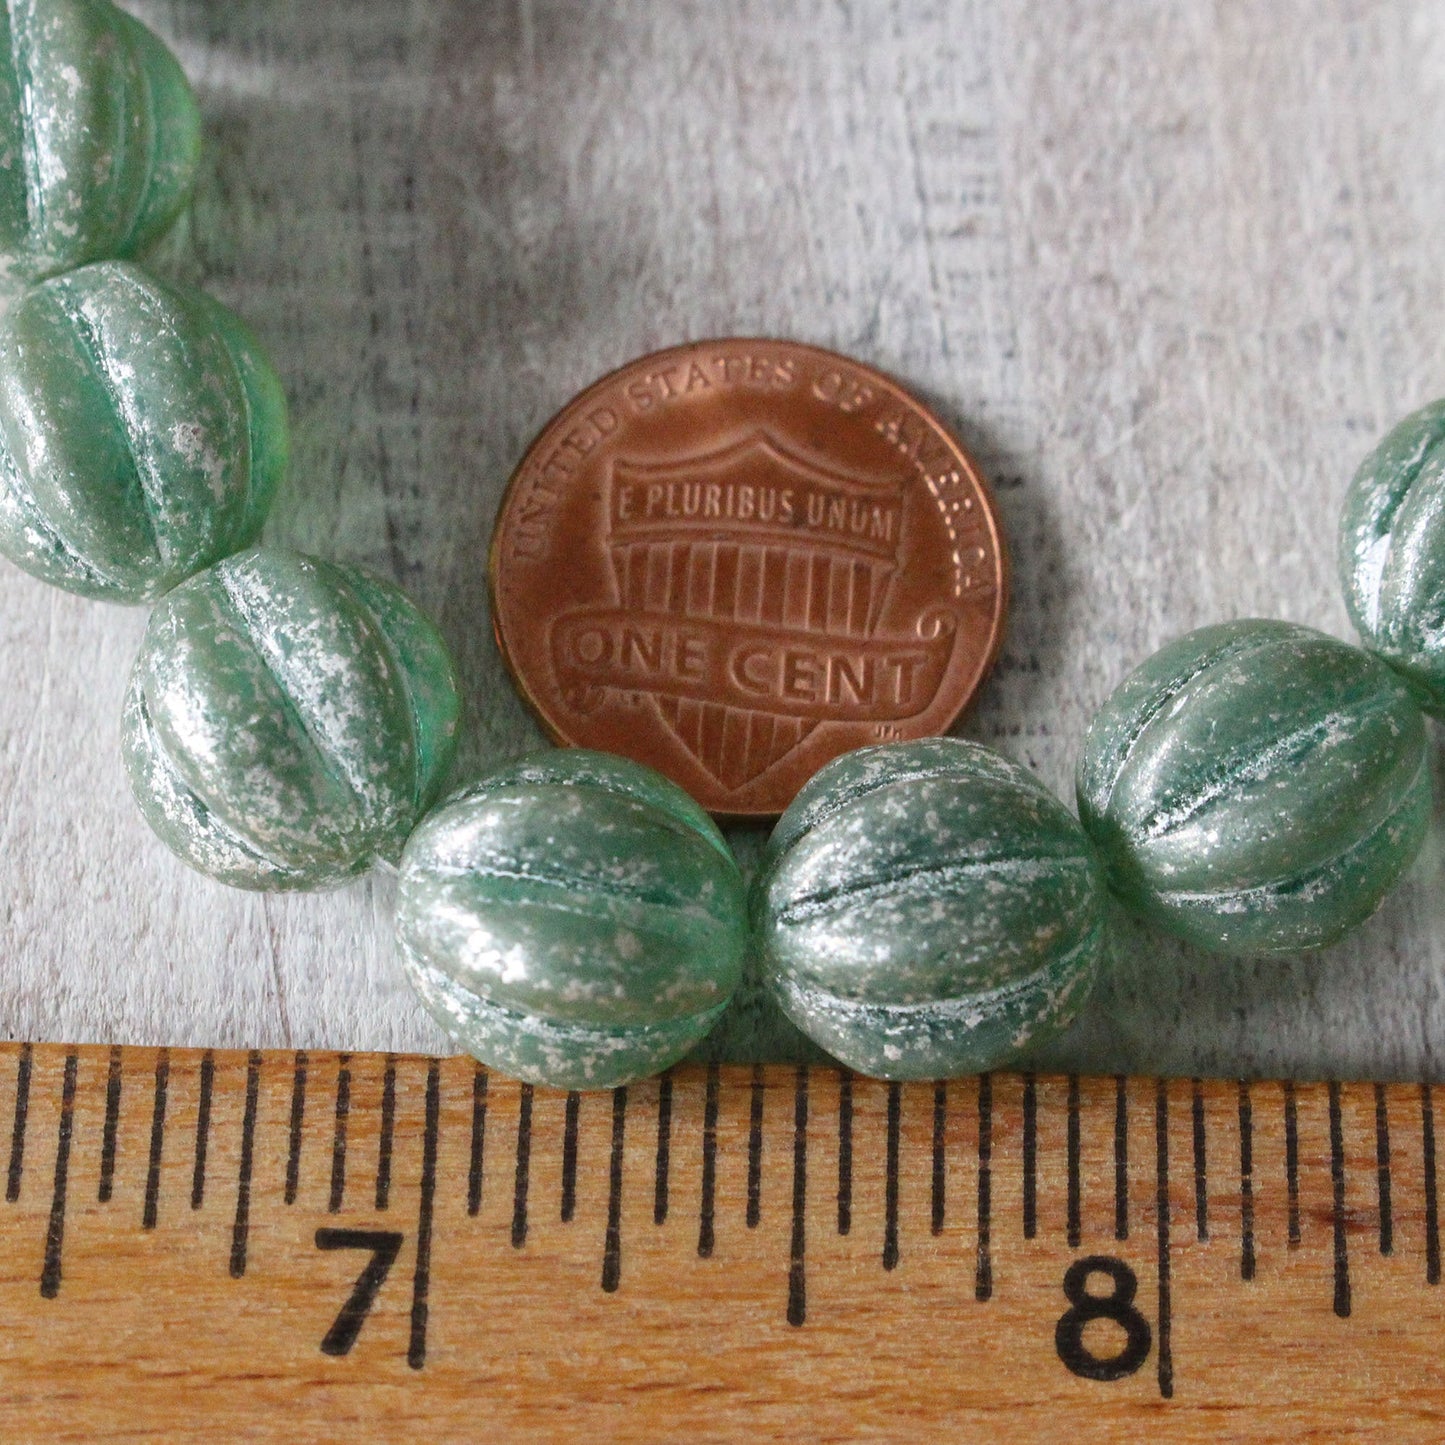 10mm, 12mm Melon Beads - Celadon with Silver Dust - 15